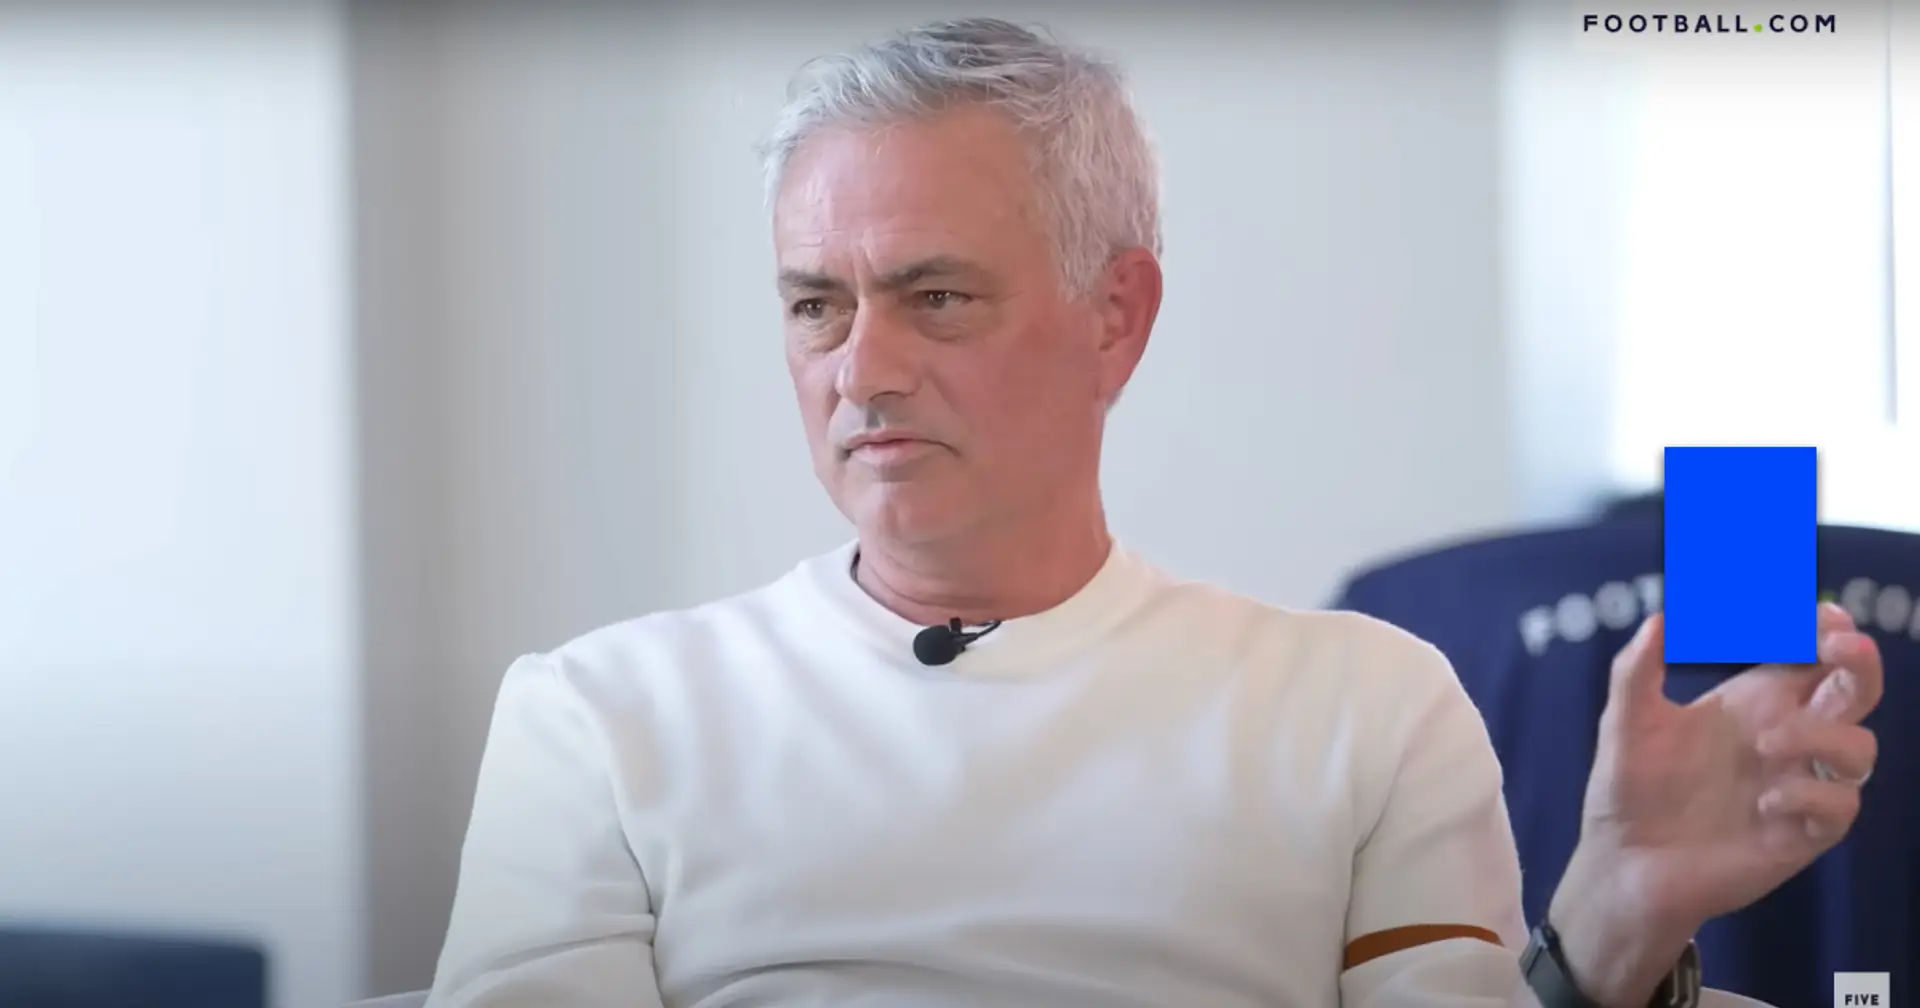 Mourinho wants to attend Chelsea games and 3 more under-radar stories